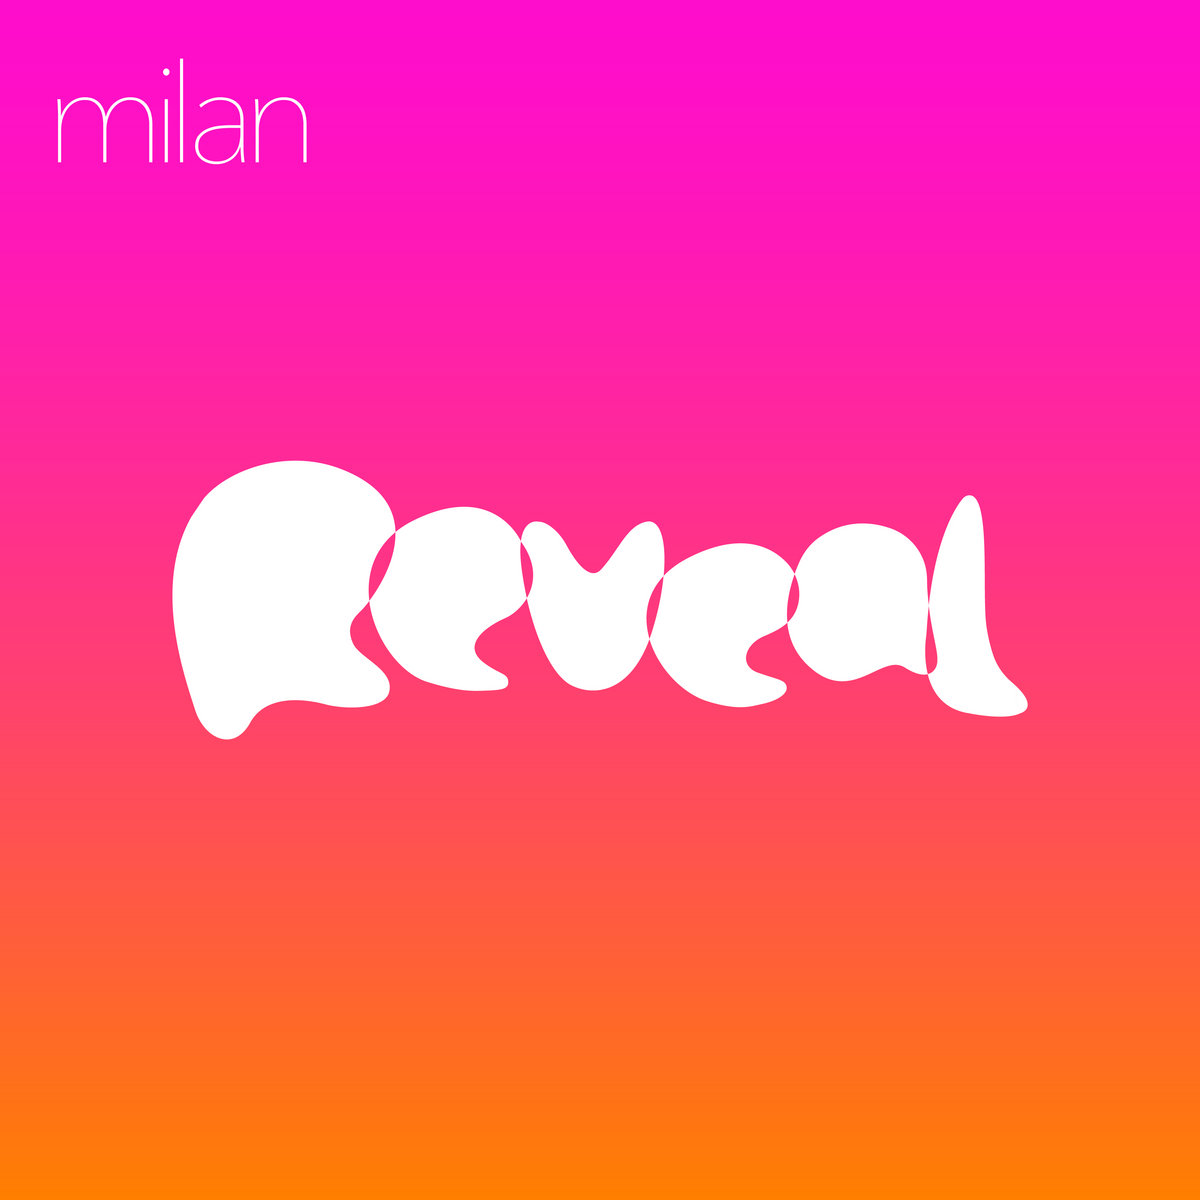 22. Reveal - Milan.I discovered this artist back in 2018 upon hearing Sight For Sore Eyes on a radio show. And this album is fantastic, really gives me PSB vibes! Best tracks:Note To SelfWhy Would I Lie To You?Must Have Been LoveSight For Sore Eyes @milanmusicuk